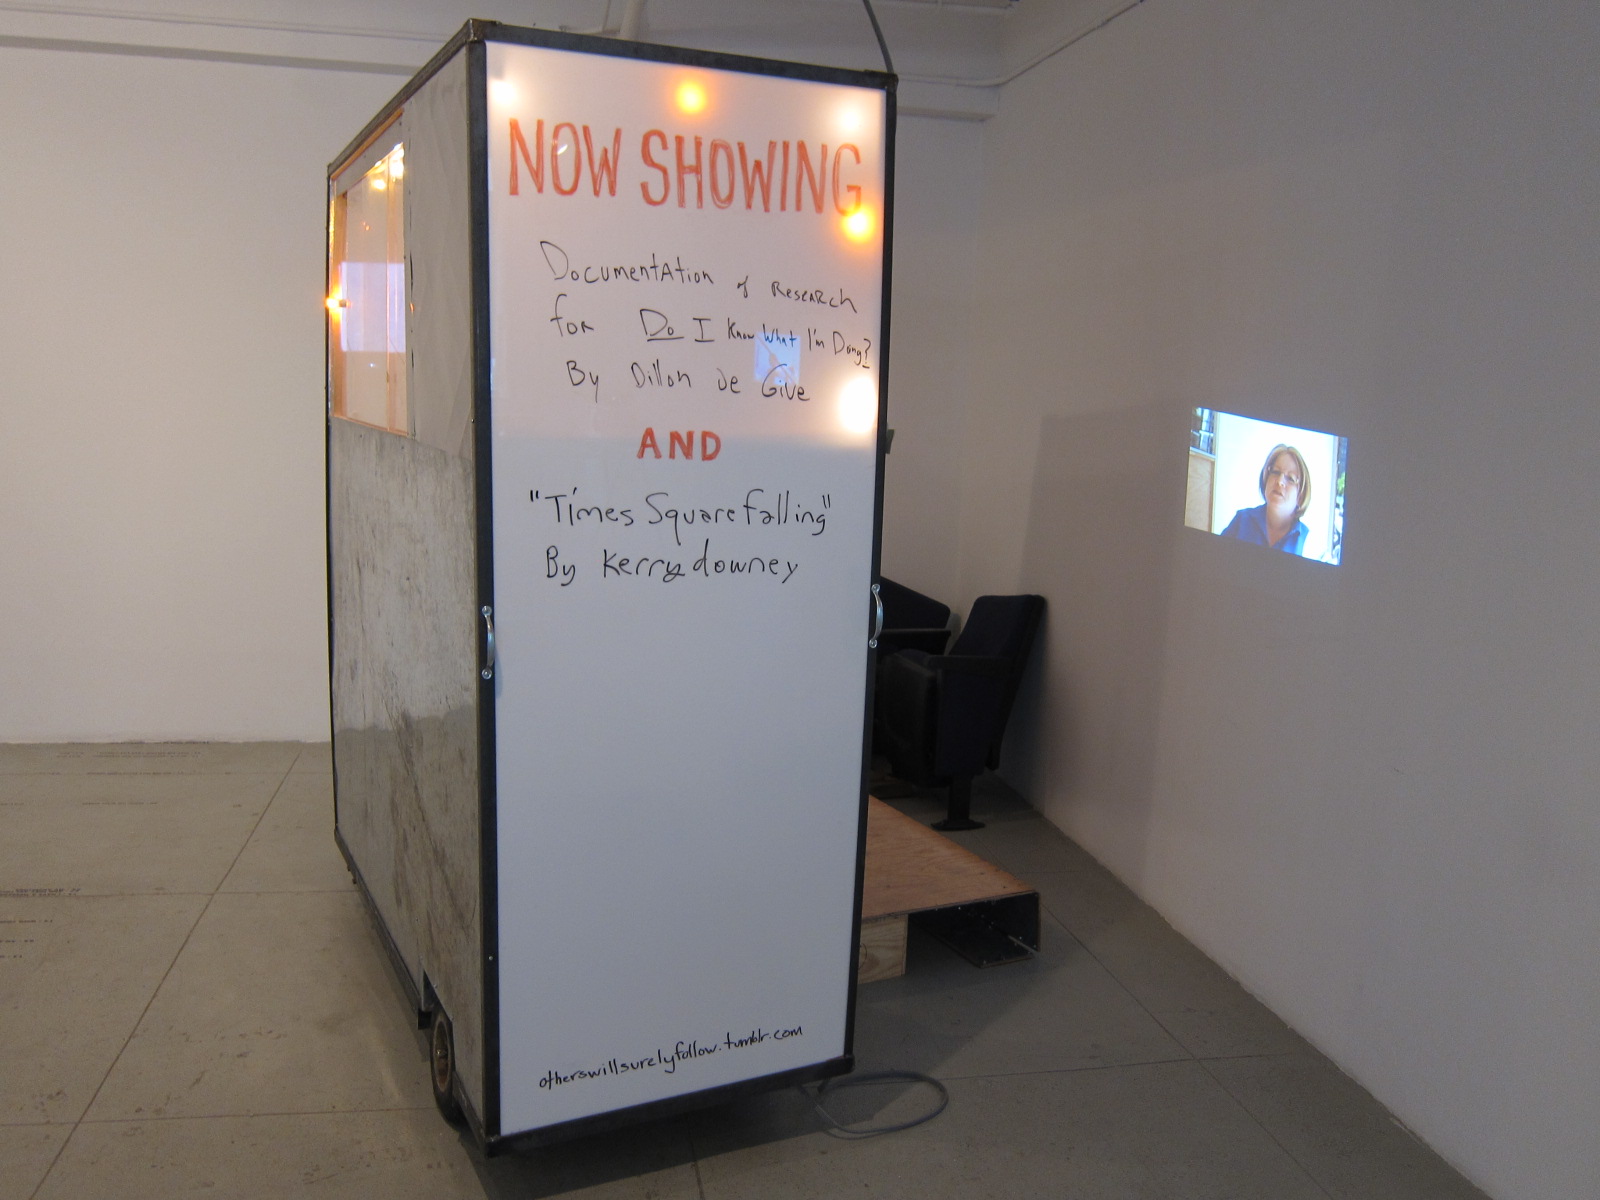   Danyel Ferrari &amp; Rachel Higgins,   others will surely follow , 2014. Multimedia cart with video projection and seating. 